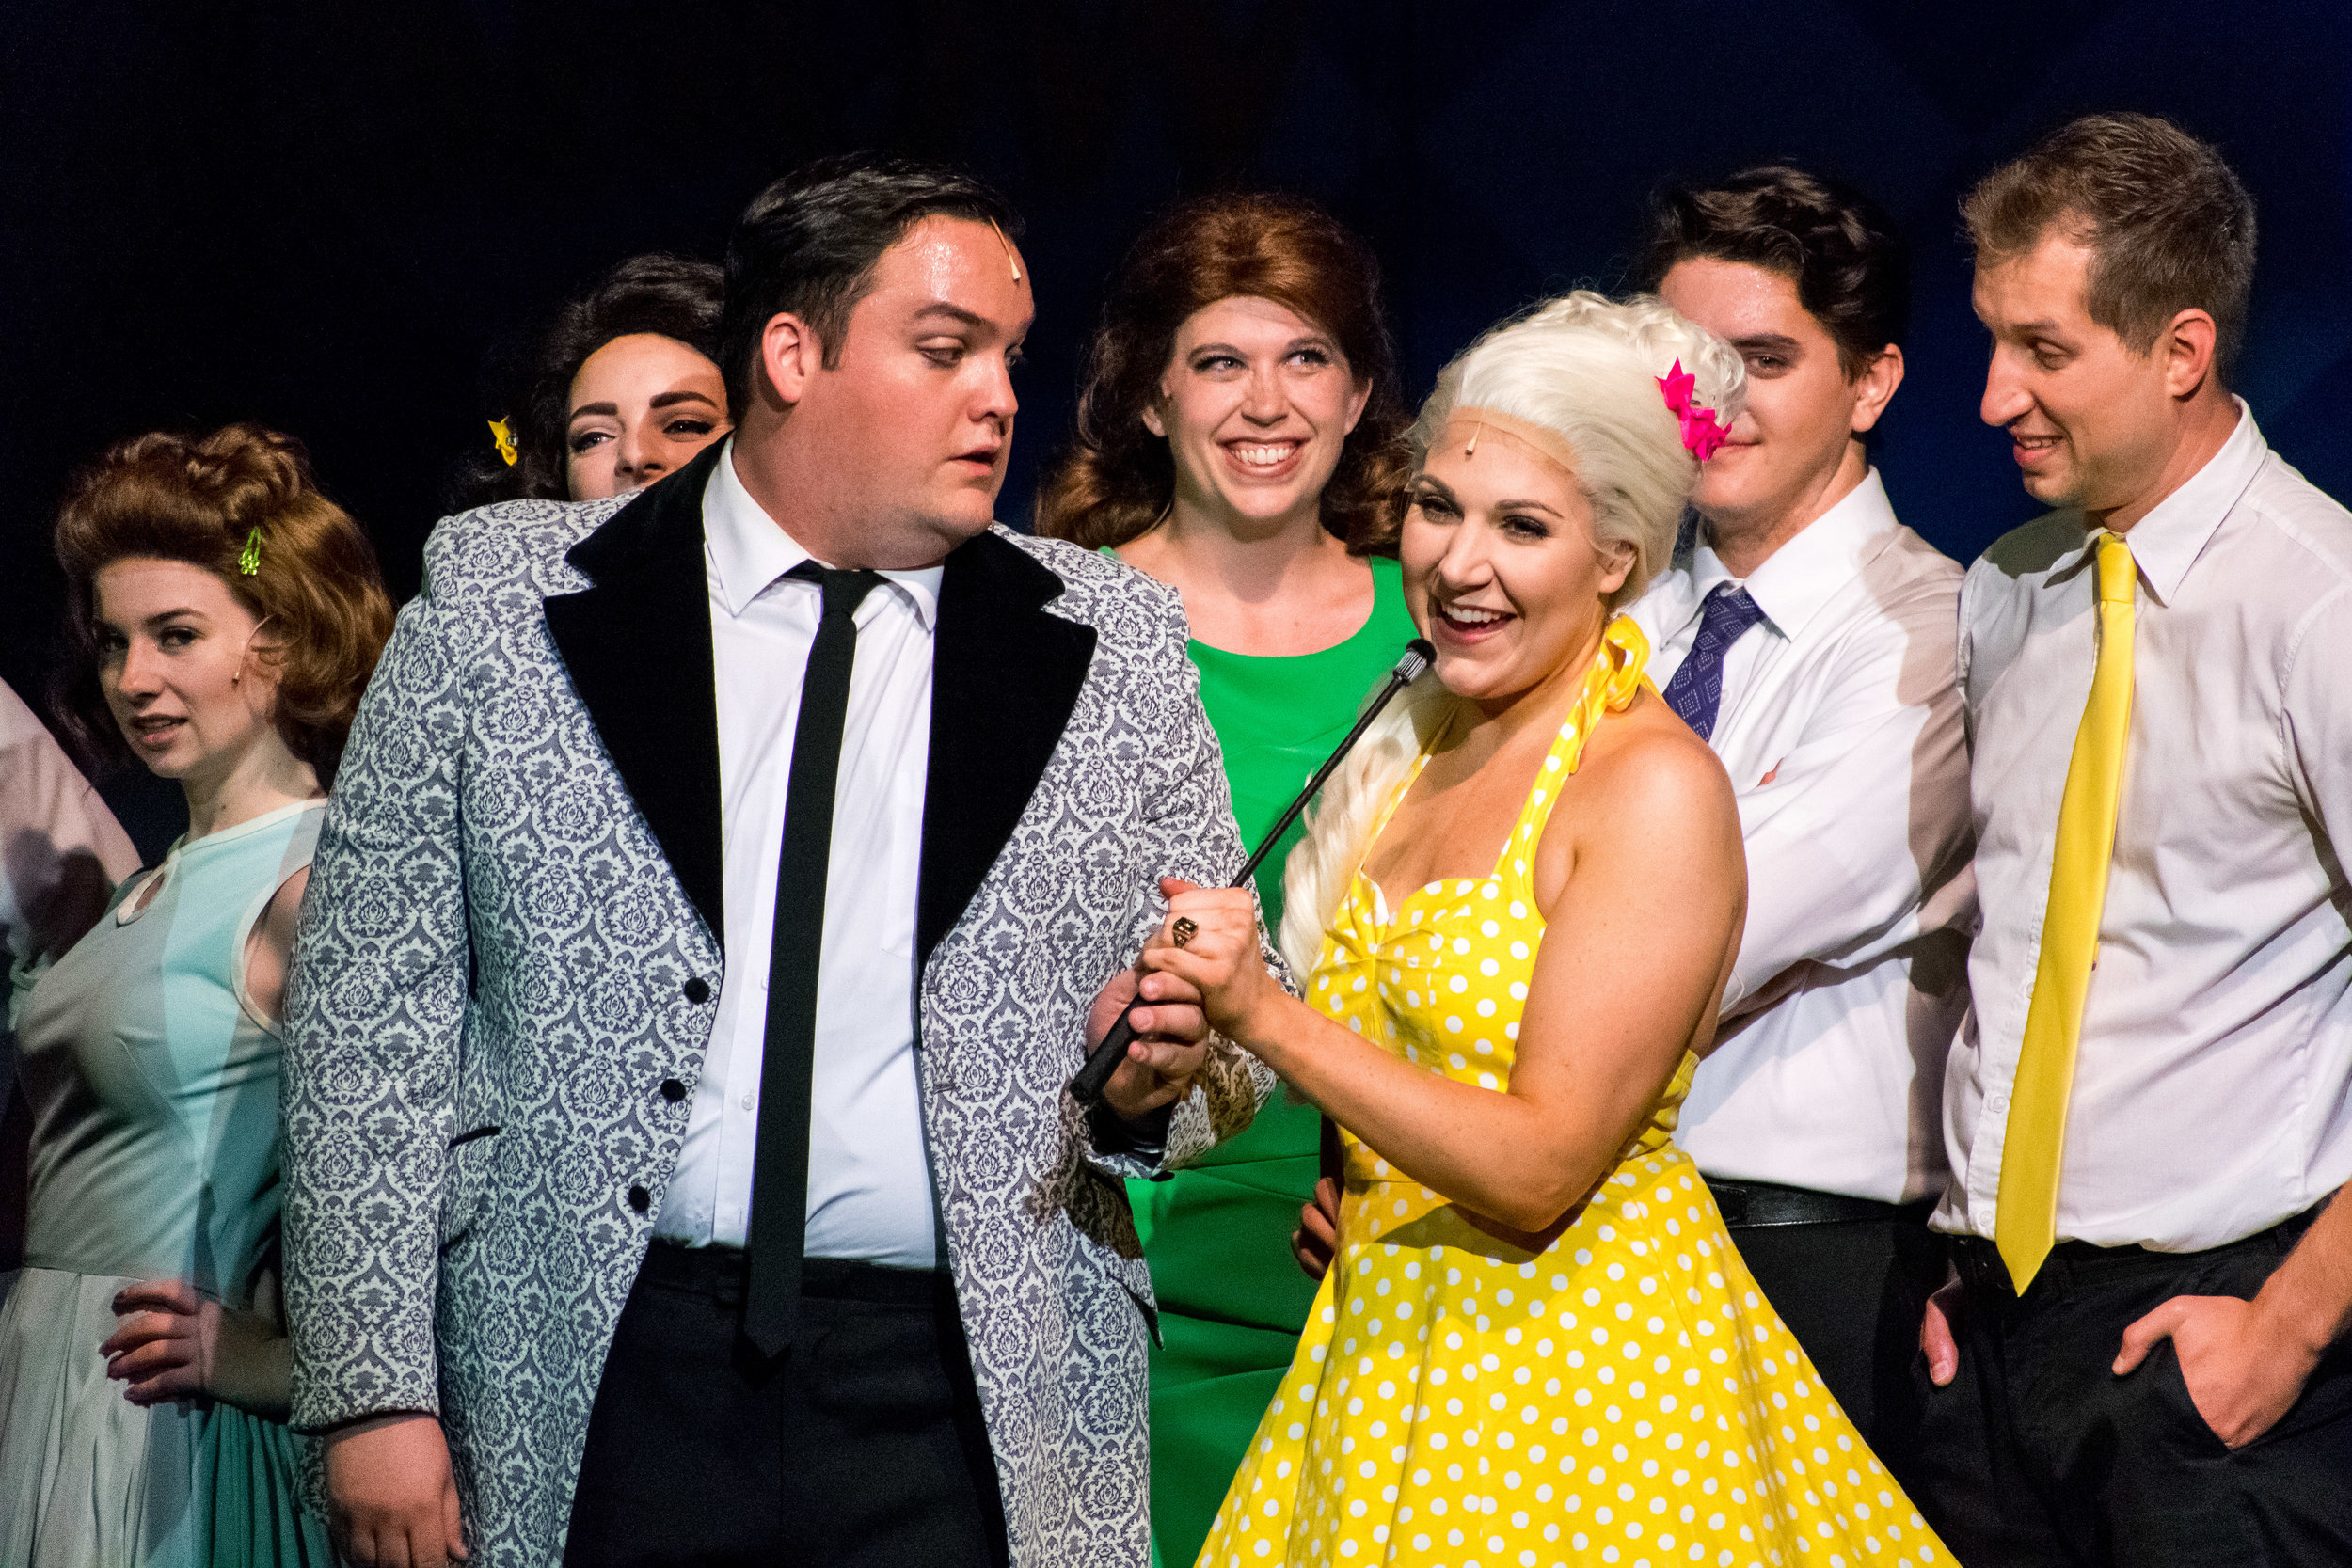   Hairspray  at Rockville Musical Theatre 